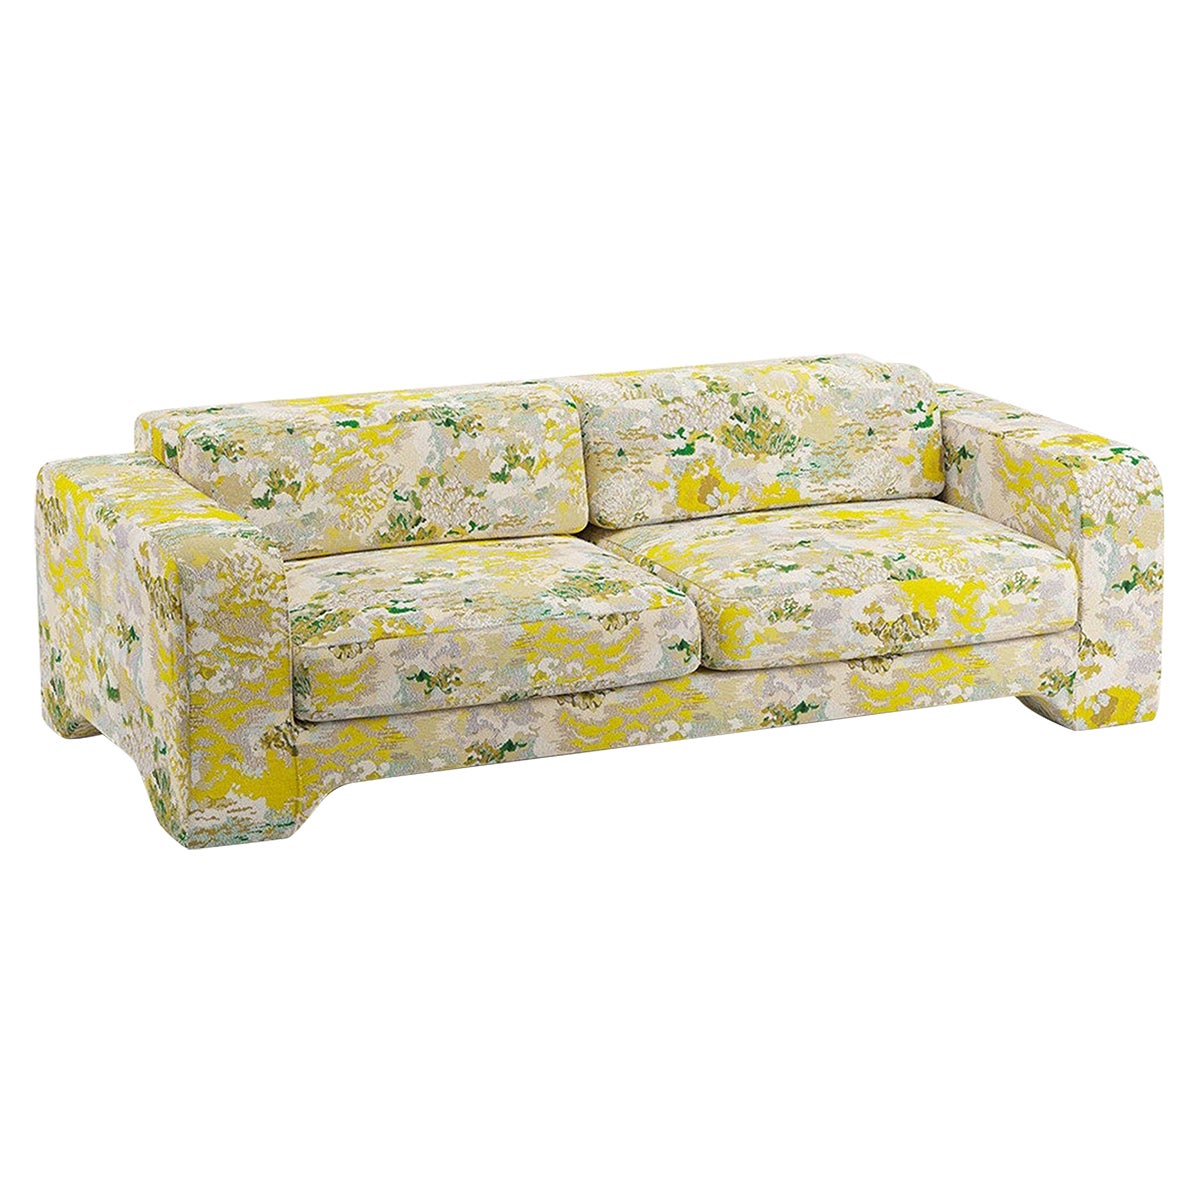 Popus Editions Giovanna 2.5 Seater Sofa in Citrine Marrakech Jacquard Fabric For Sale